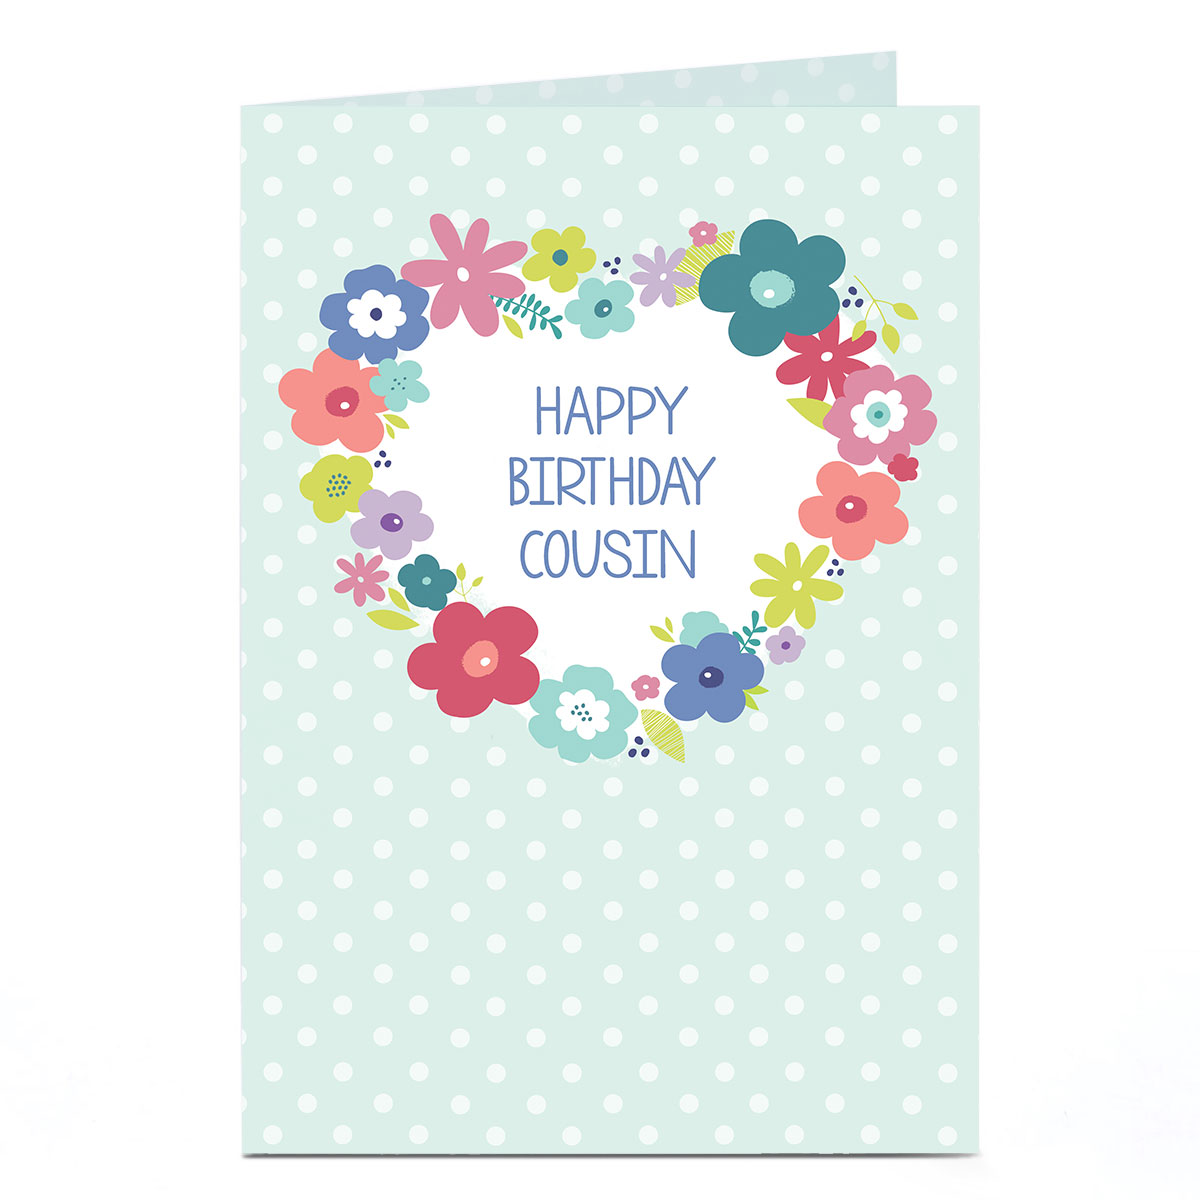 Personalised Birthday Card - Flower Wreath [Cousin]